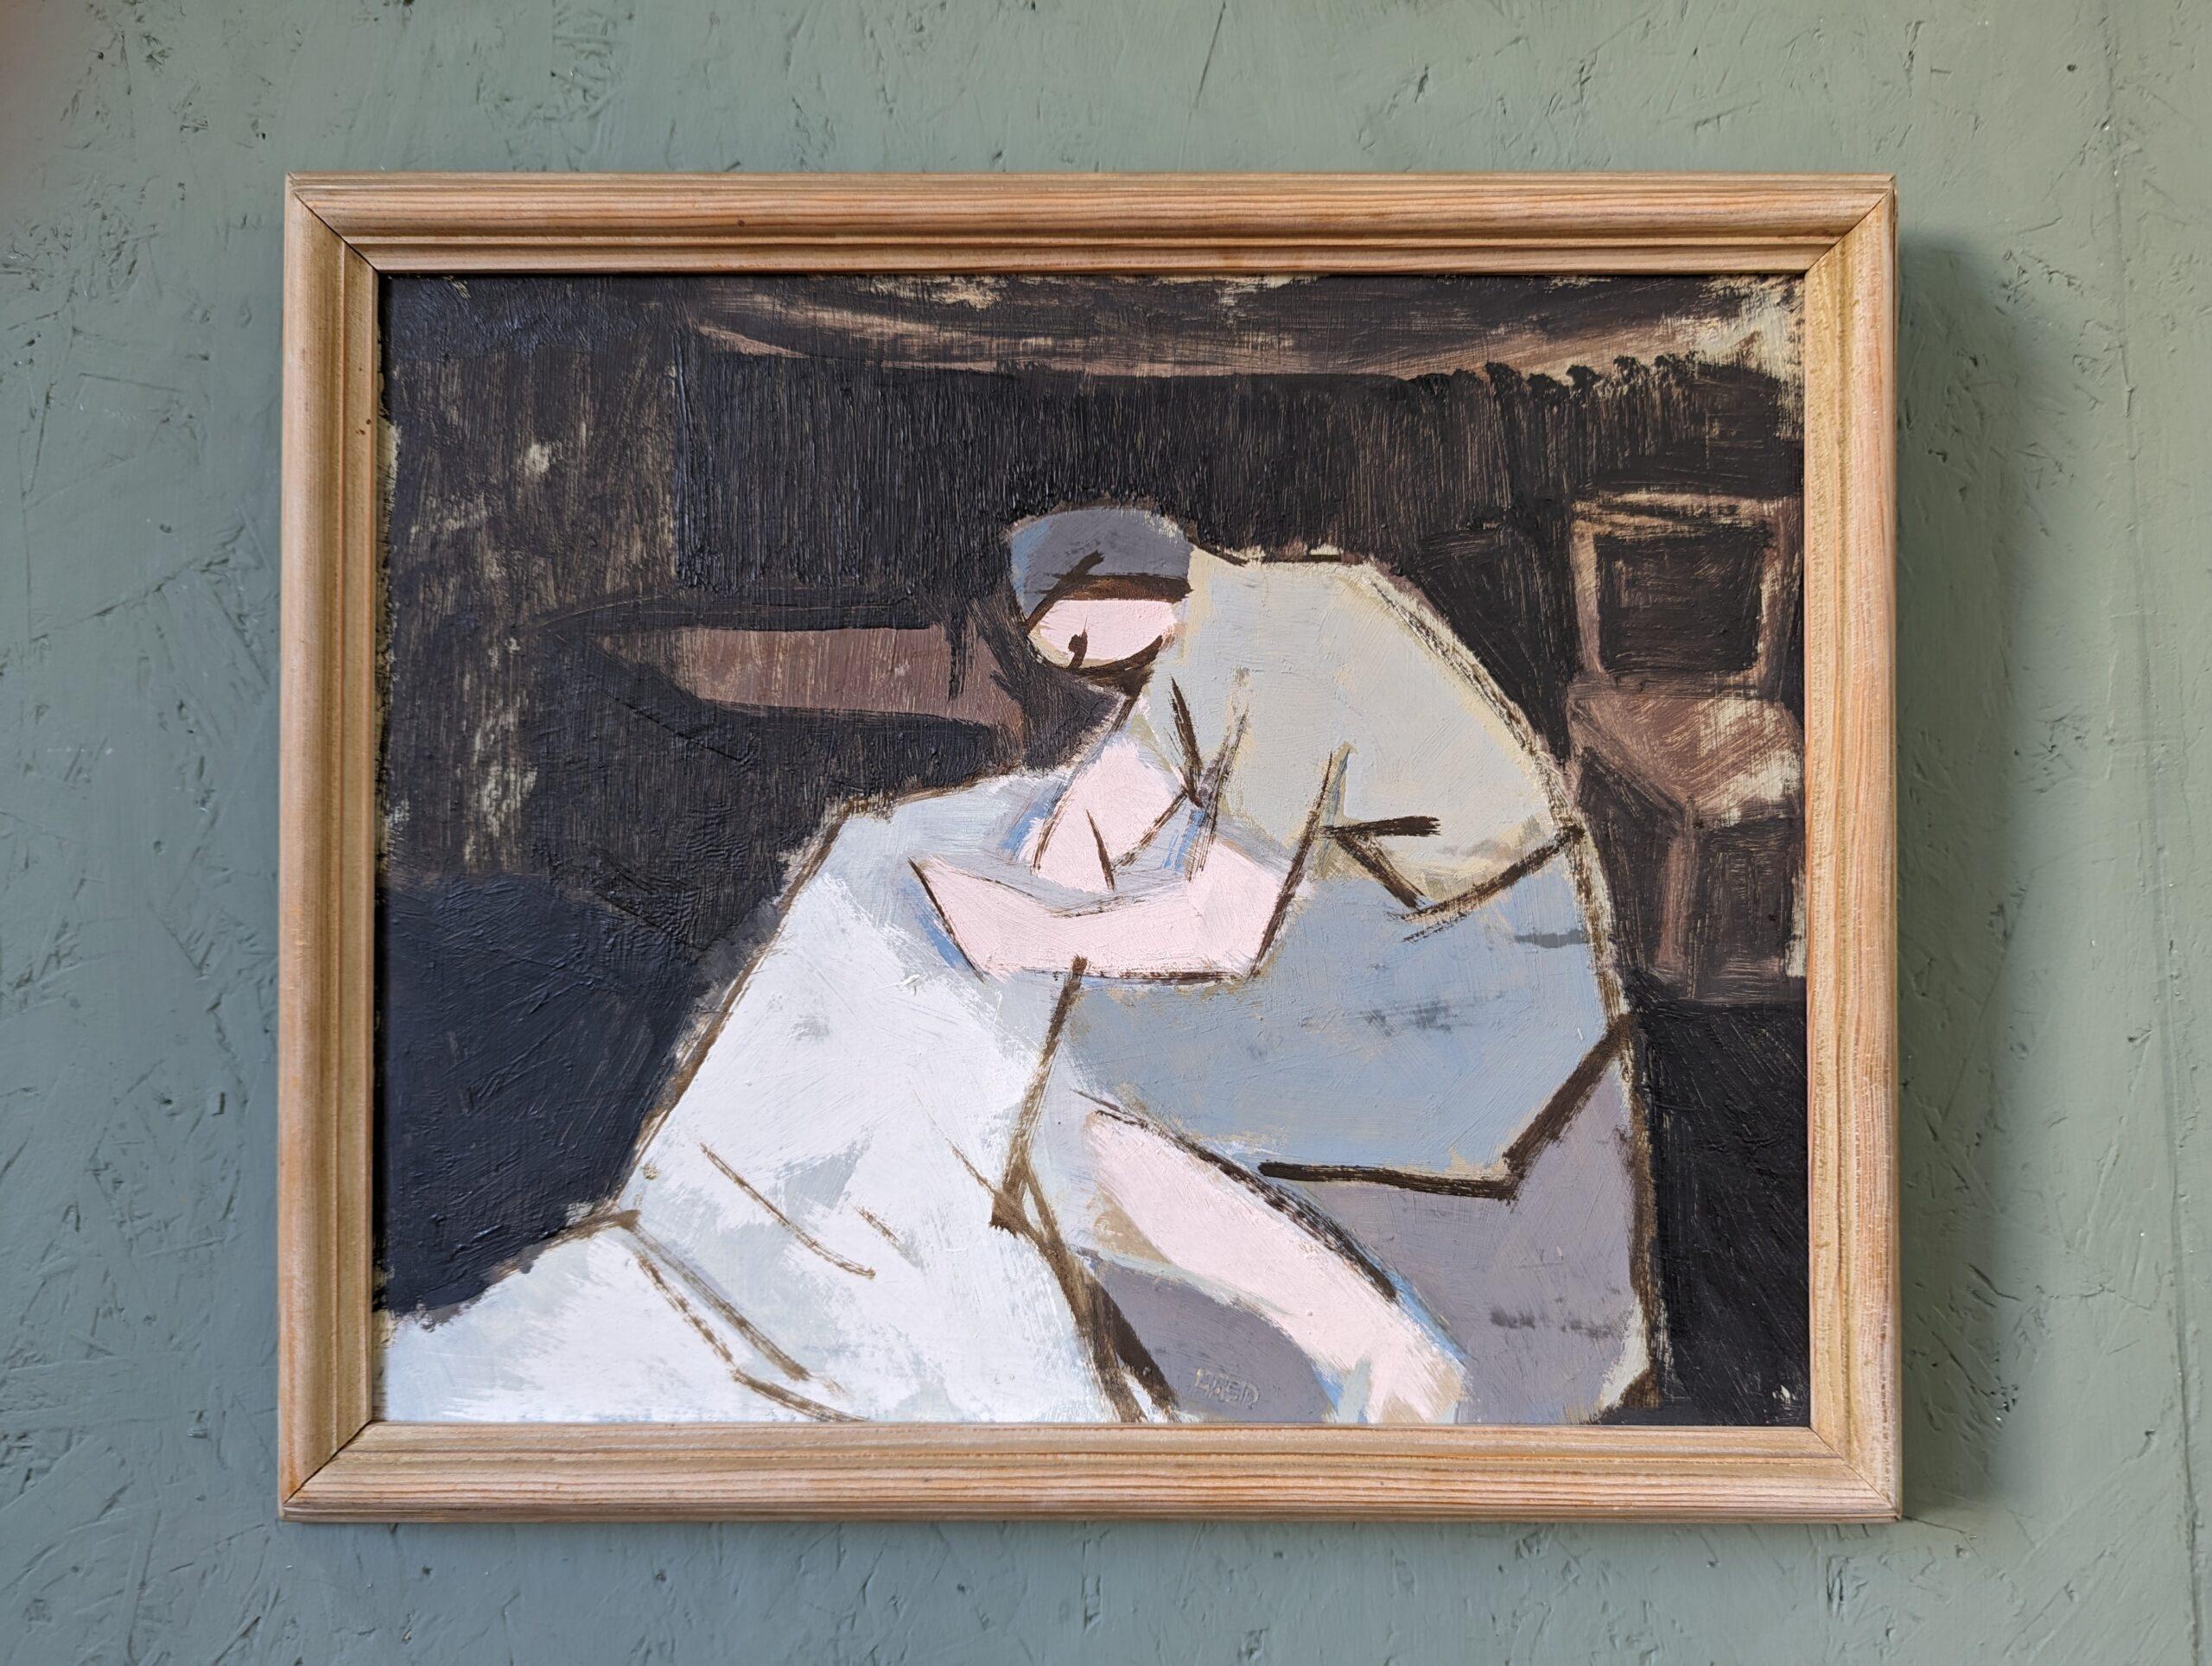 UNINTERRUPTED
Size: 39 x 47 cm (including frame)
Oil on board

An enigmatic mid-century semi-abstract figurative oil painting, that masterfully contrasts light and dark elements.

In a mysterious, dark black room rendered with swift and expressive